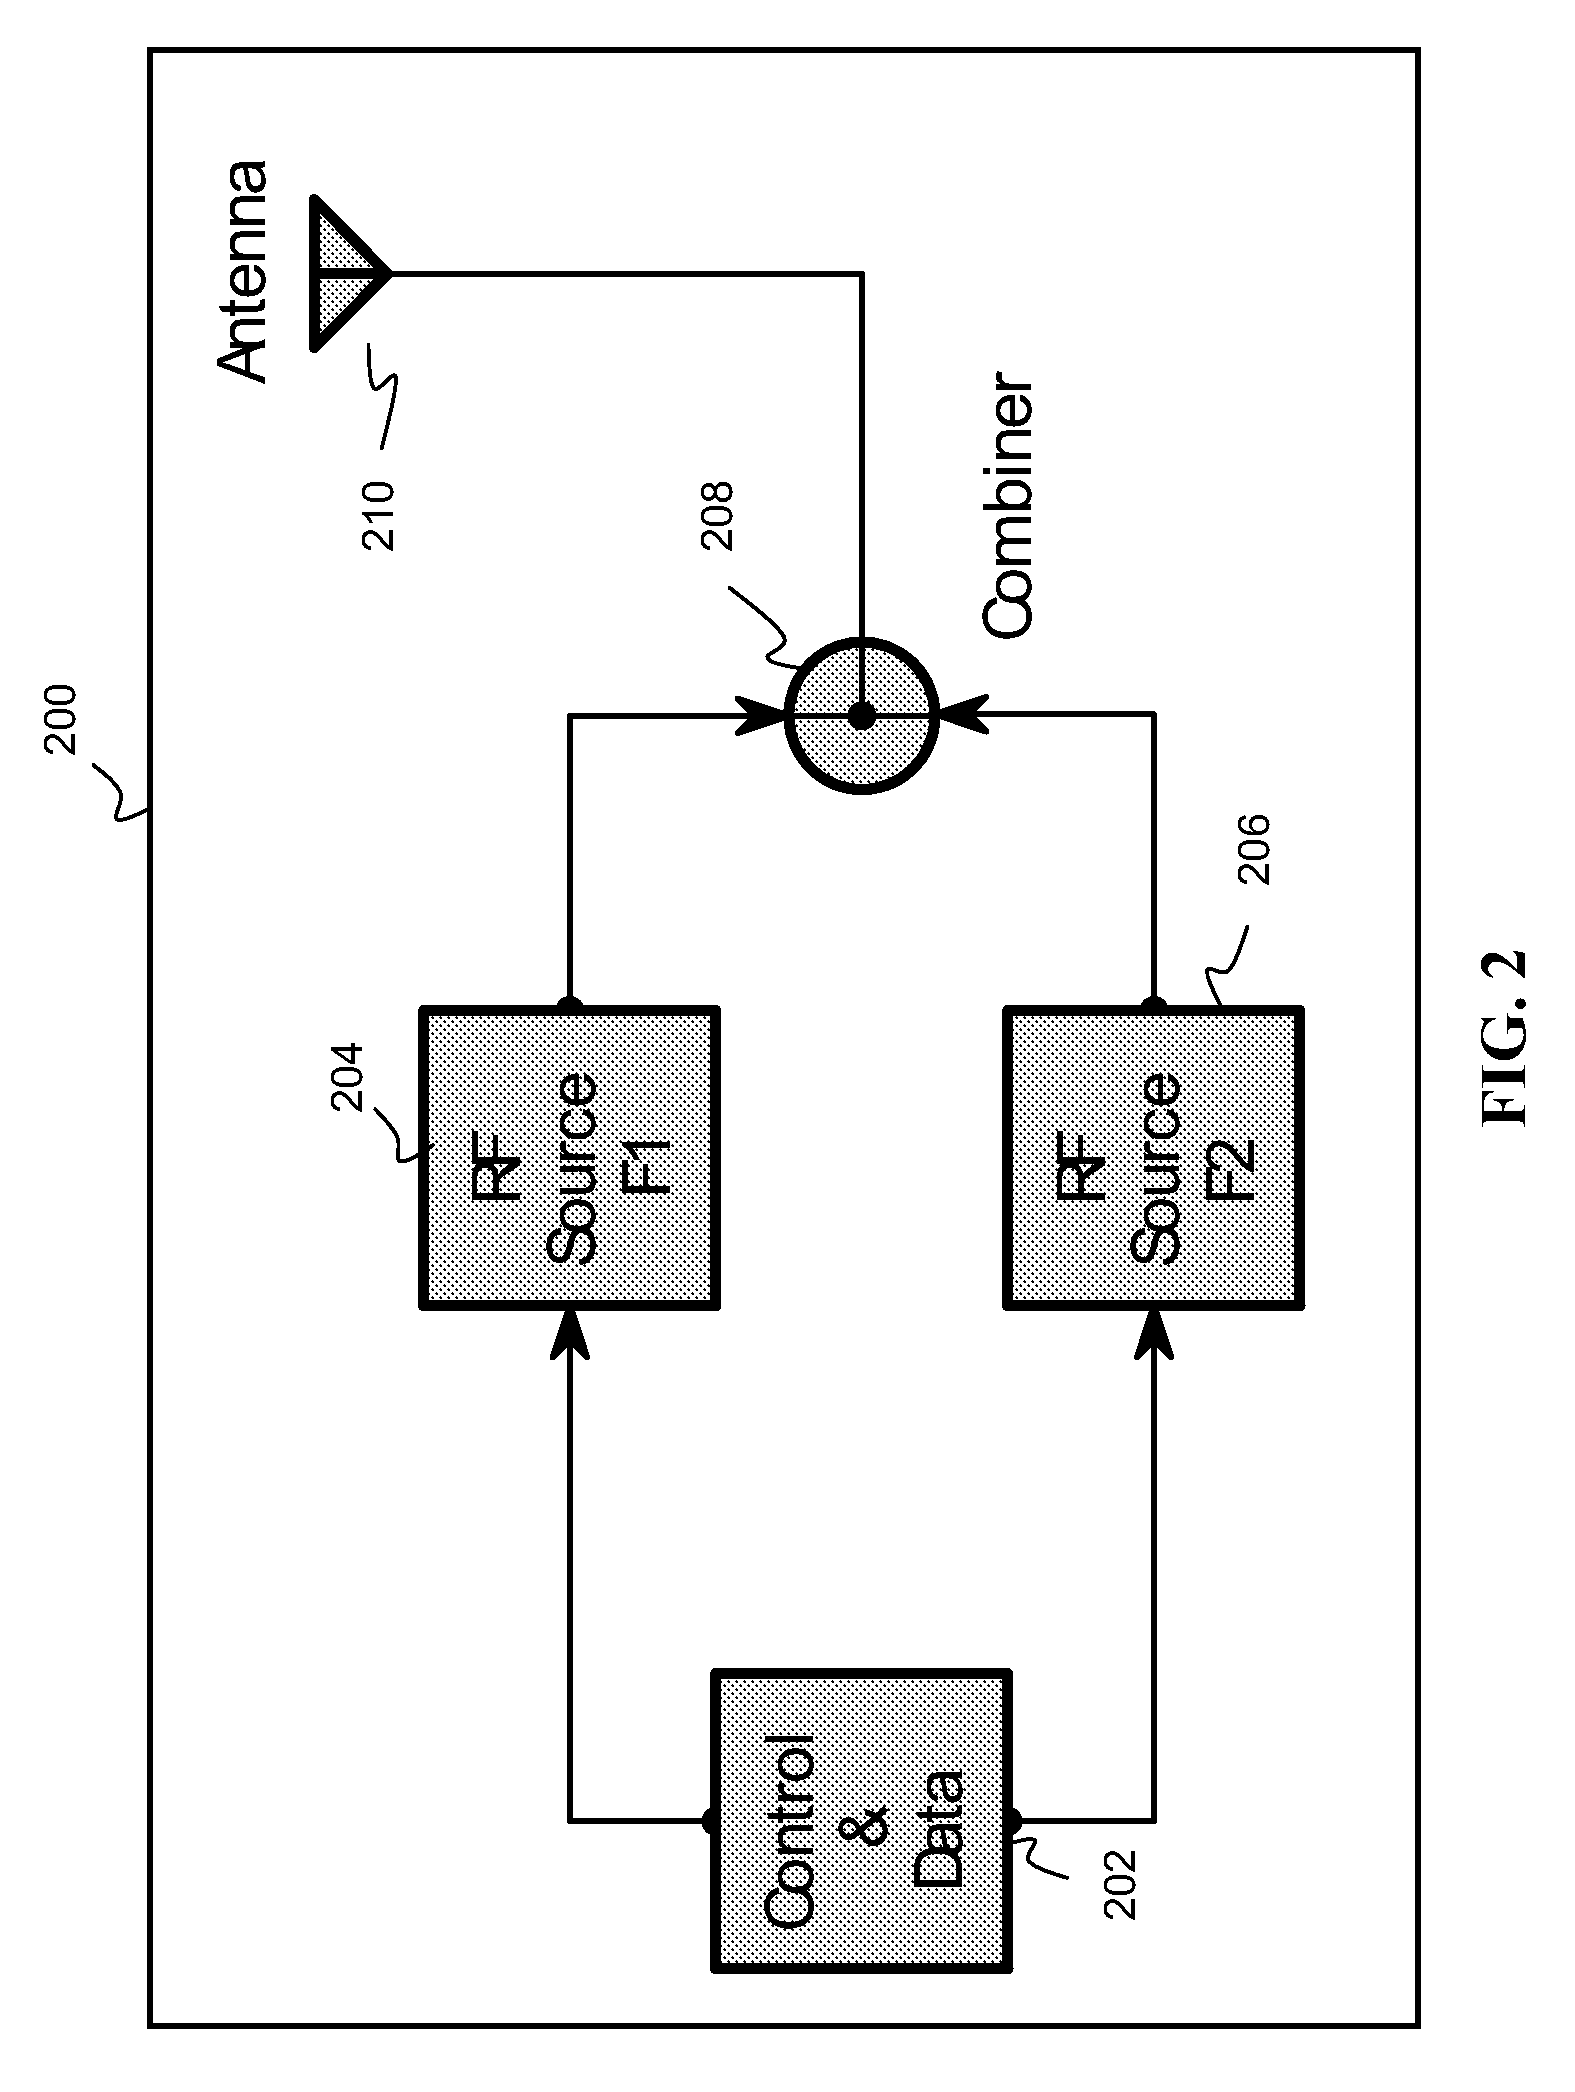 Radio communications system designed for a low-power receiver